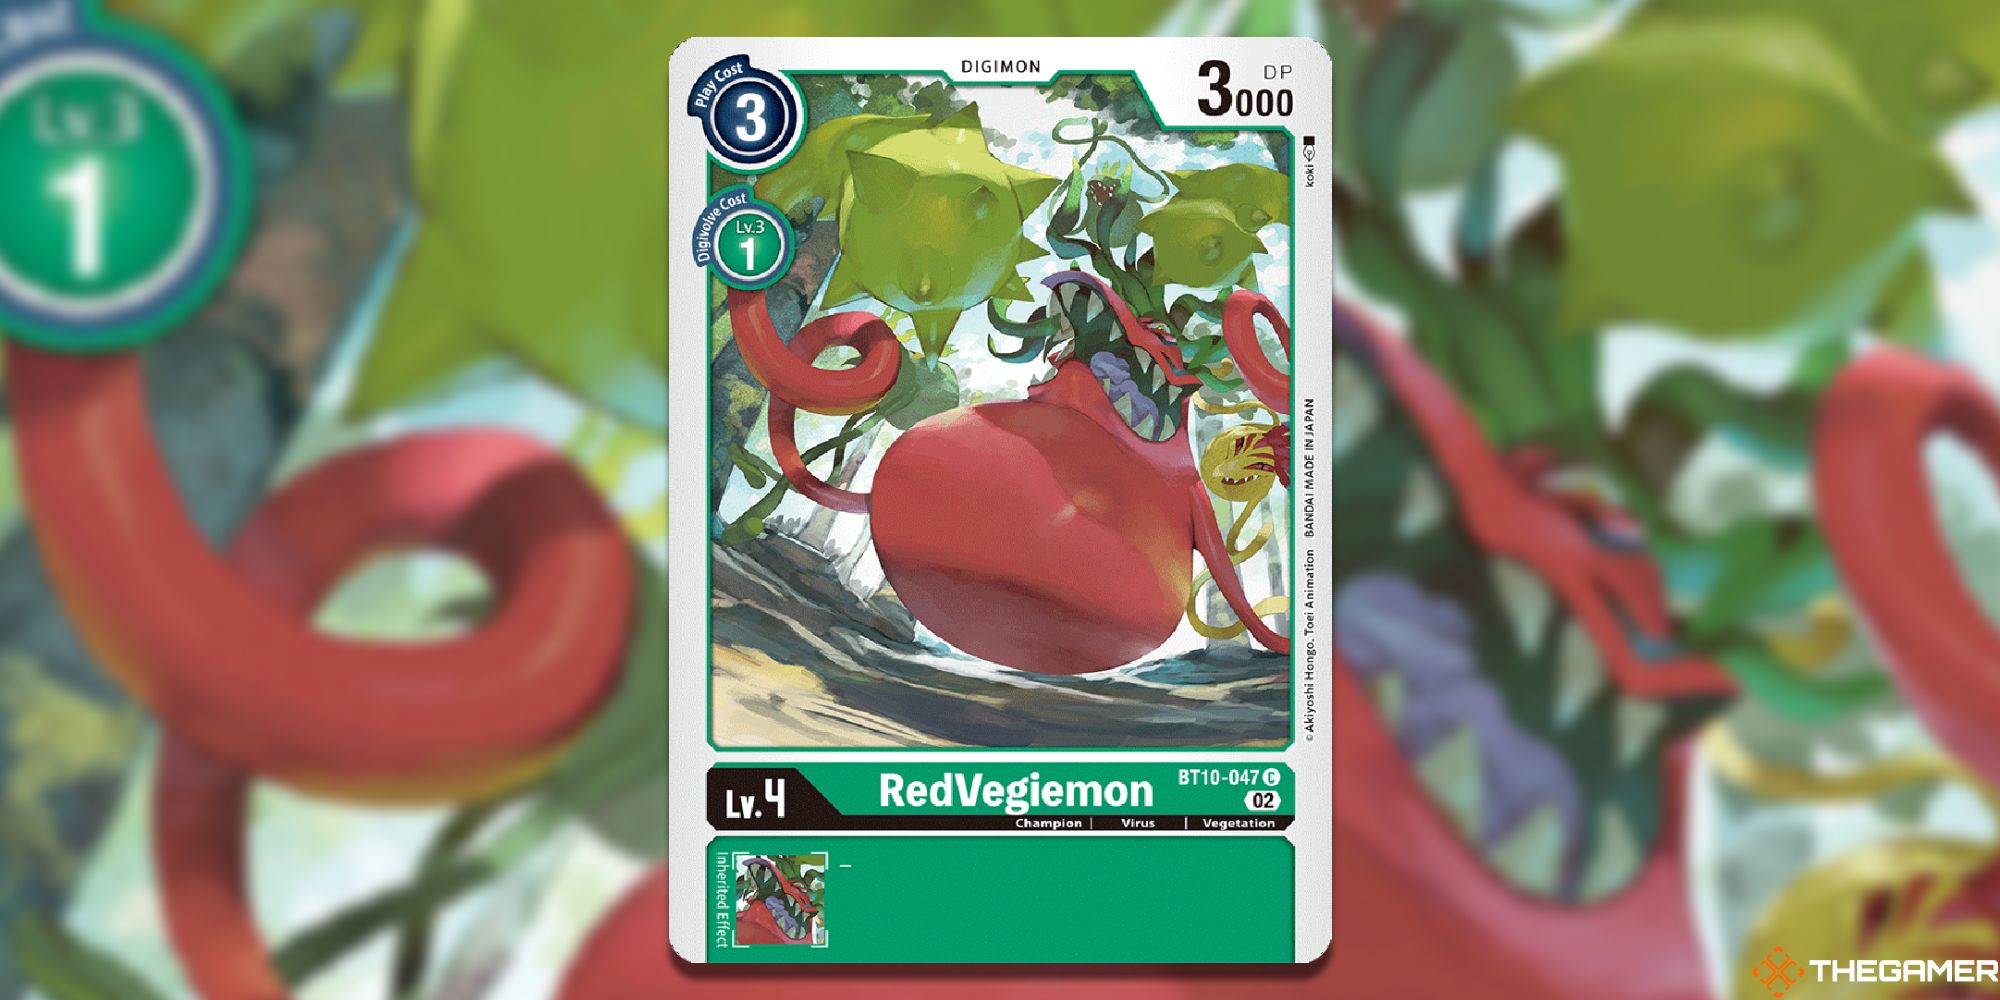 redvegiemon image with blurred background digimon card game